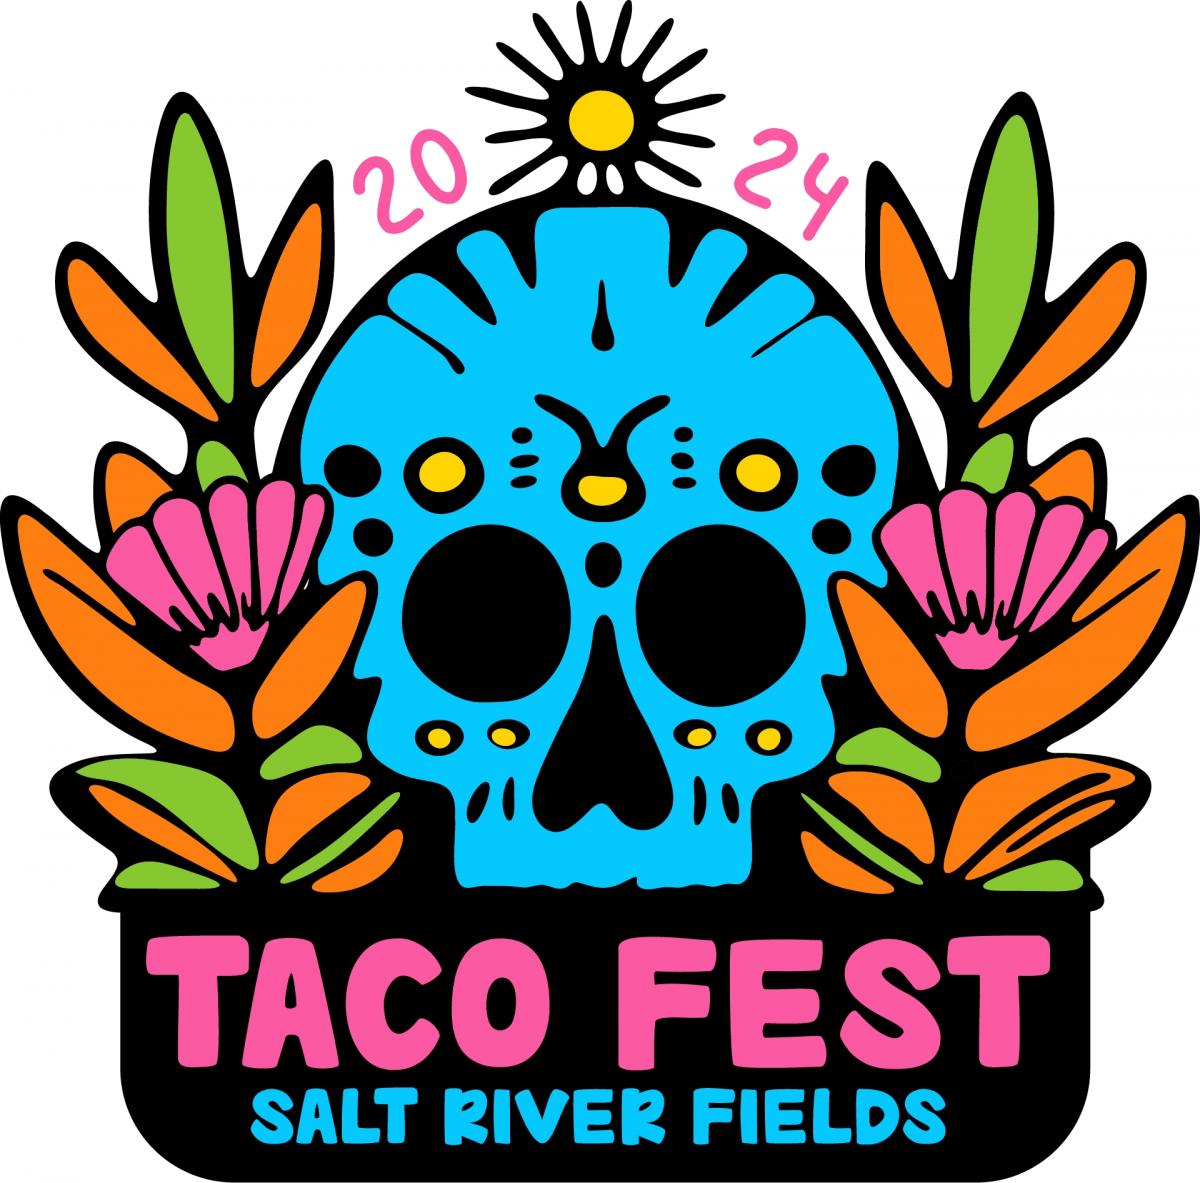 The Taco Fest at Salt River Fields cover image